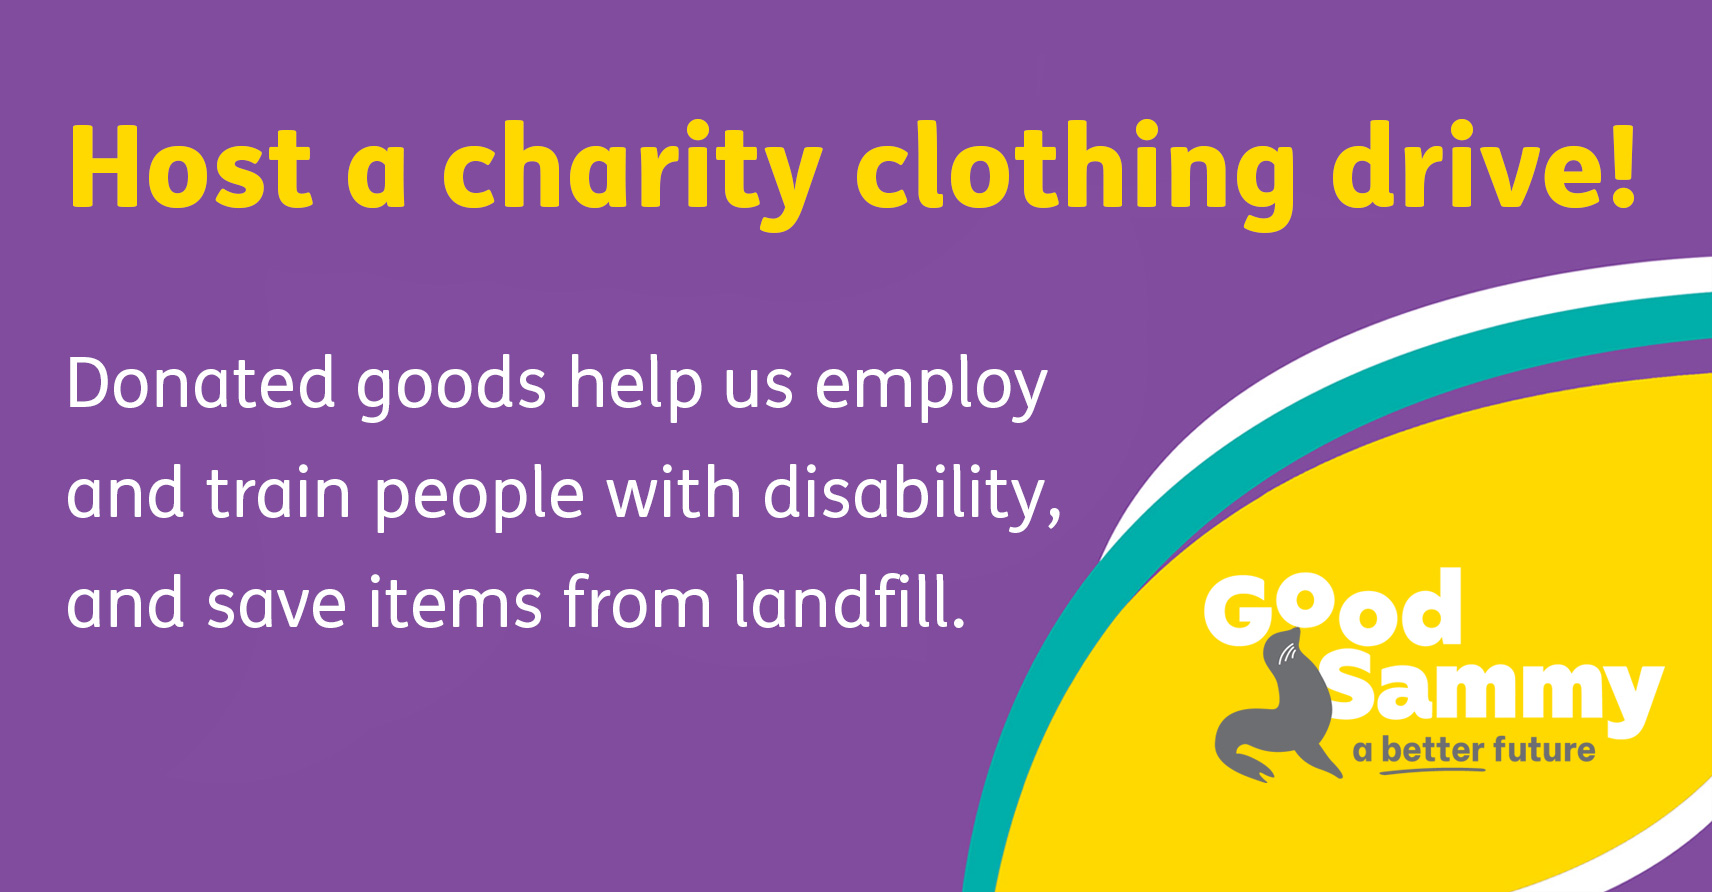 Banner that says: Host a charity clothing drive! Donated goods help us employ and train people with disability, and save items from landfill. 